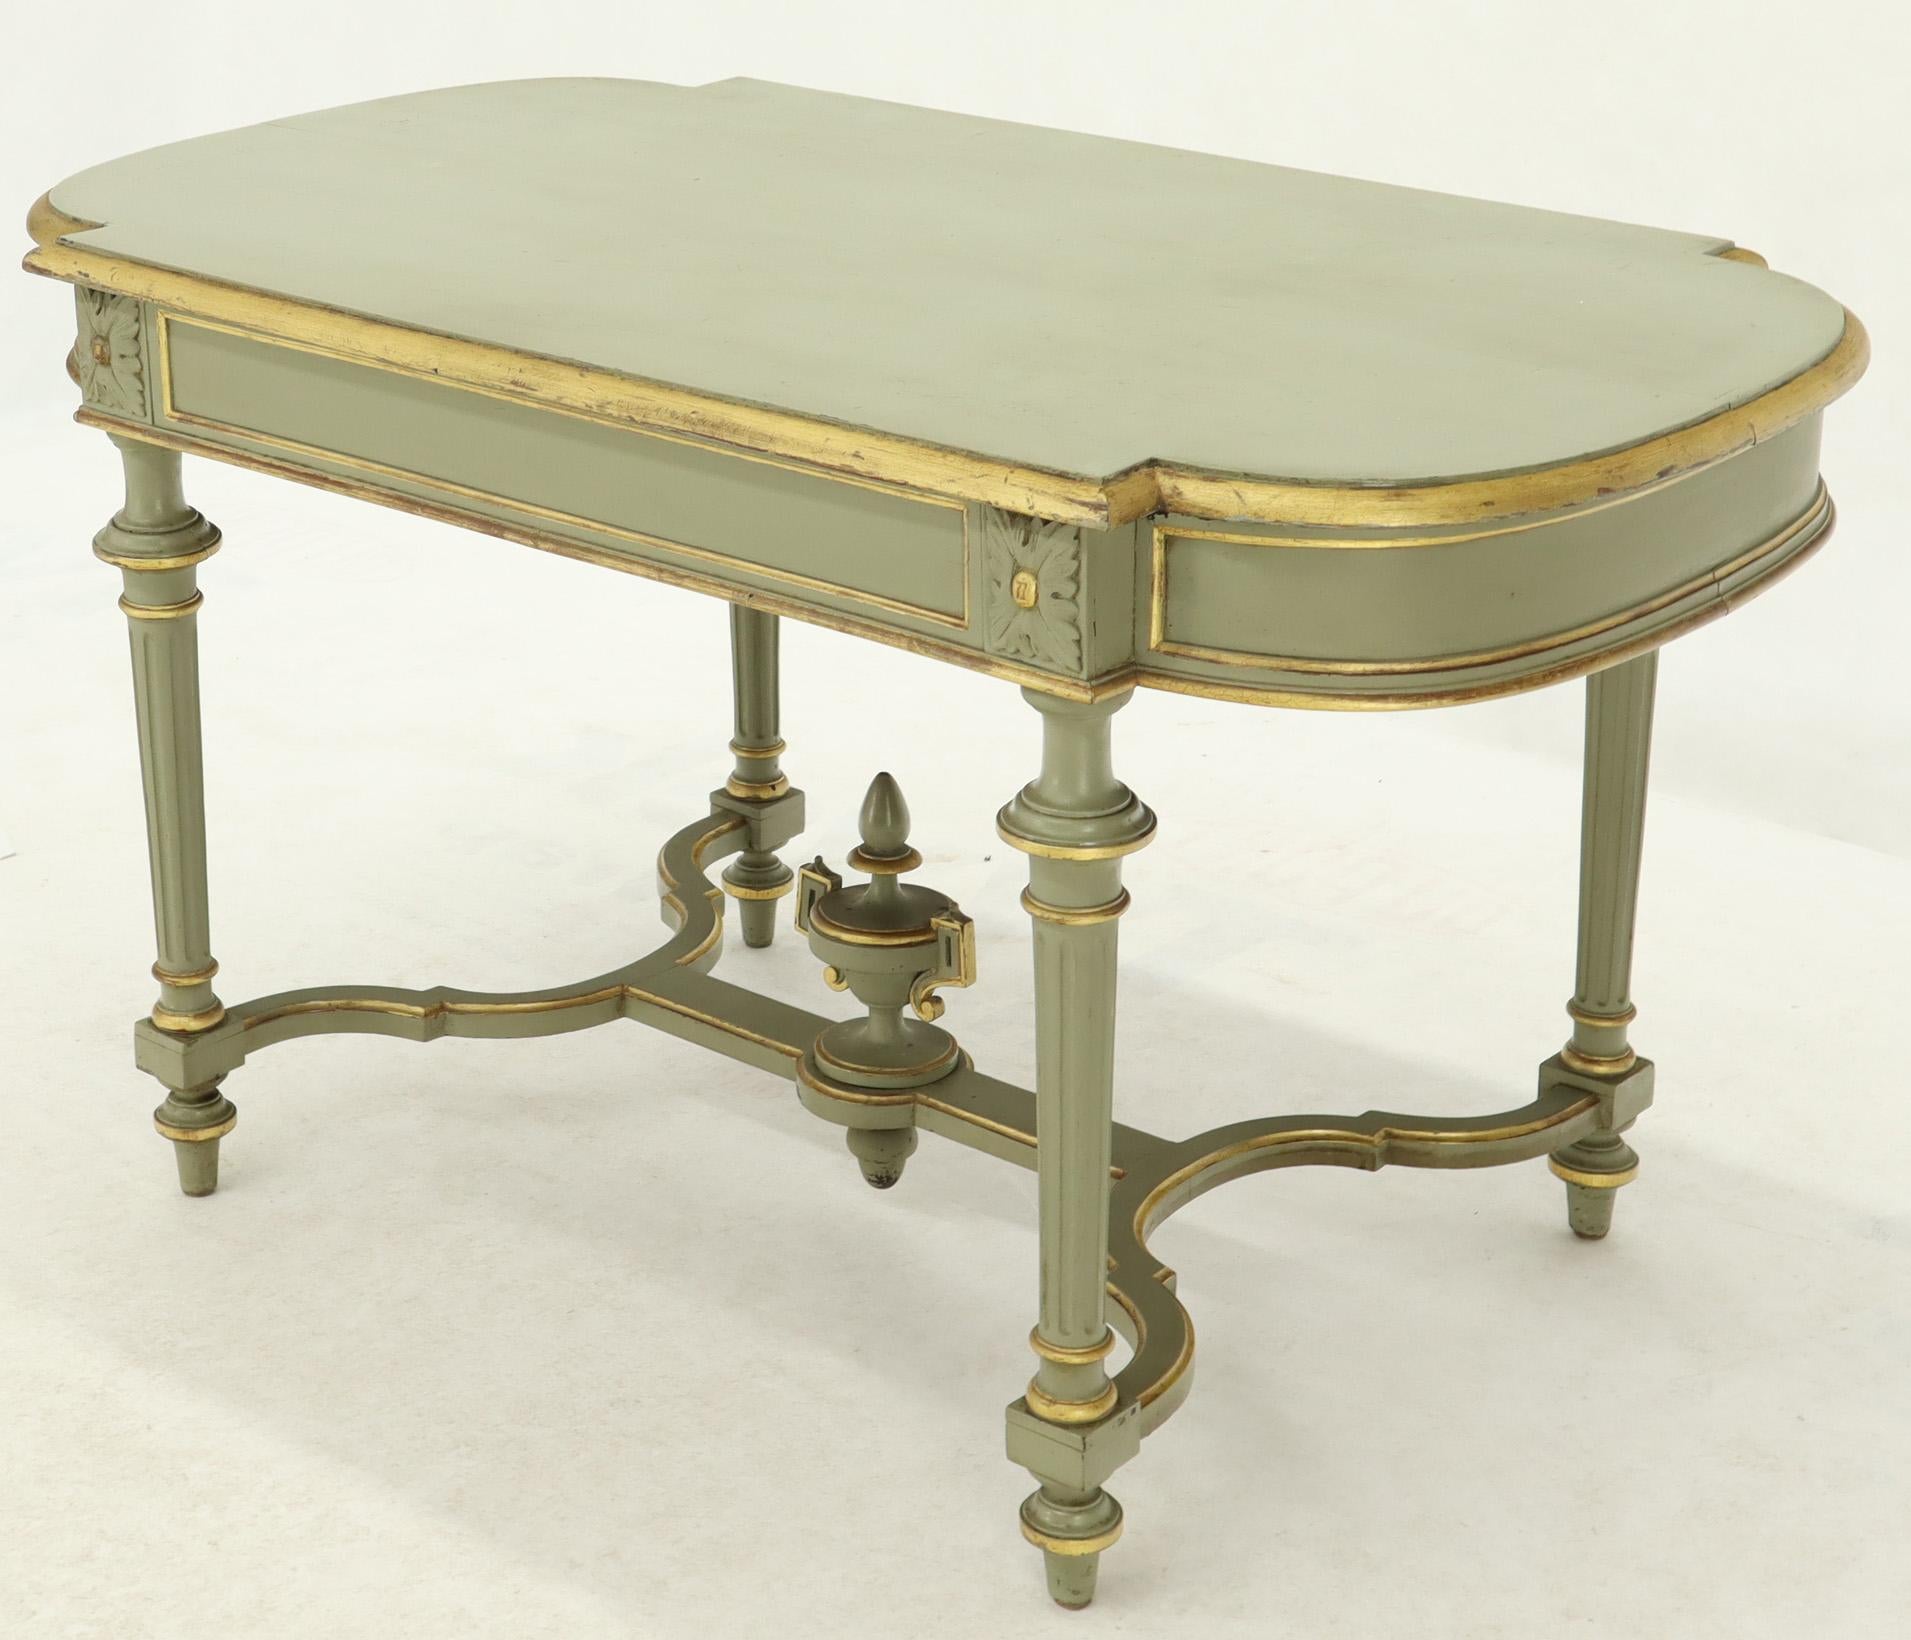 Shabby Chic and Gold Leaf Distressed Antique Table Desk Console Grande Console en vente 8